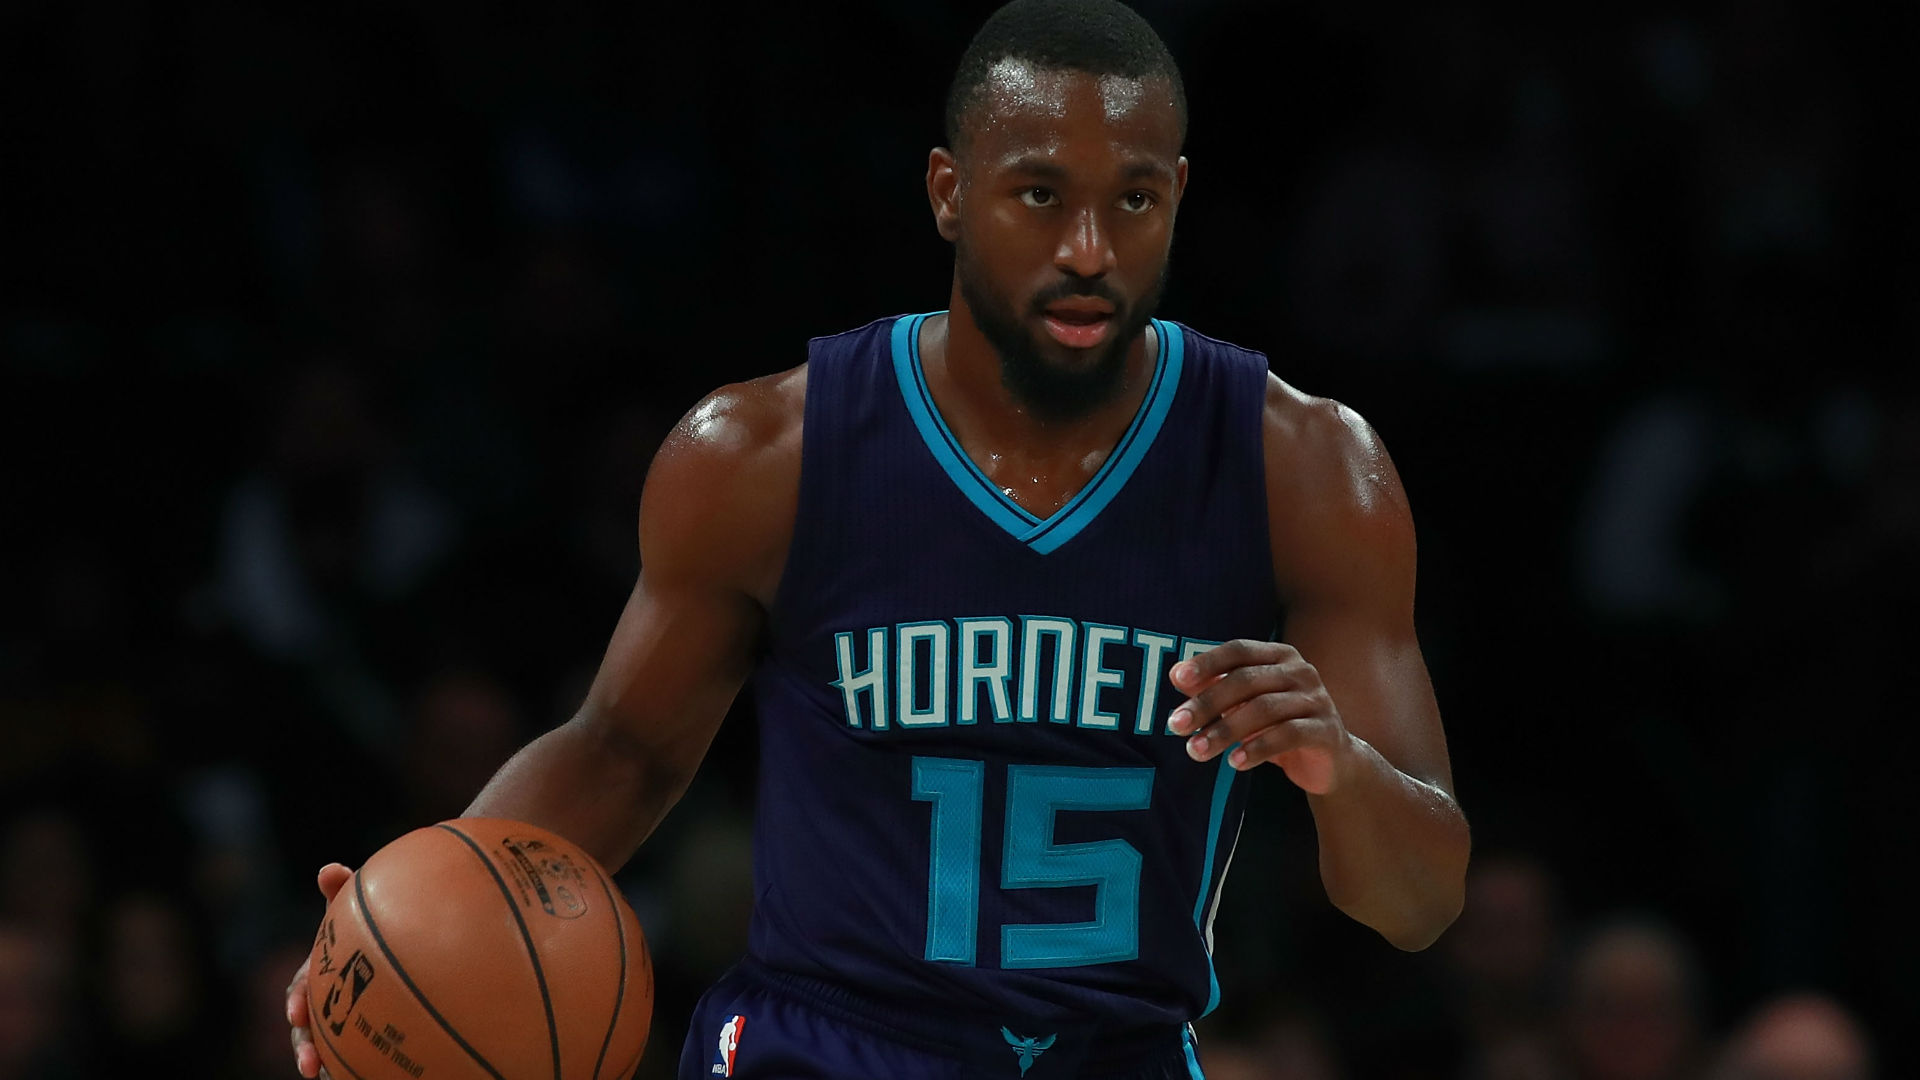 Superstar? Kemba Walker does not think he is among the NBA's elite despite his rise with the Charlotte Hornets.